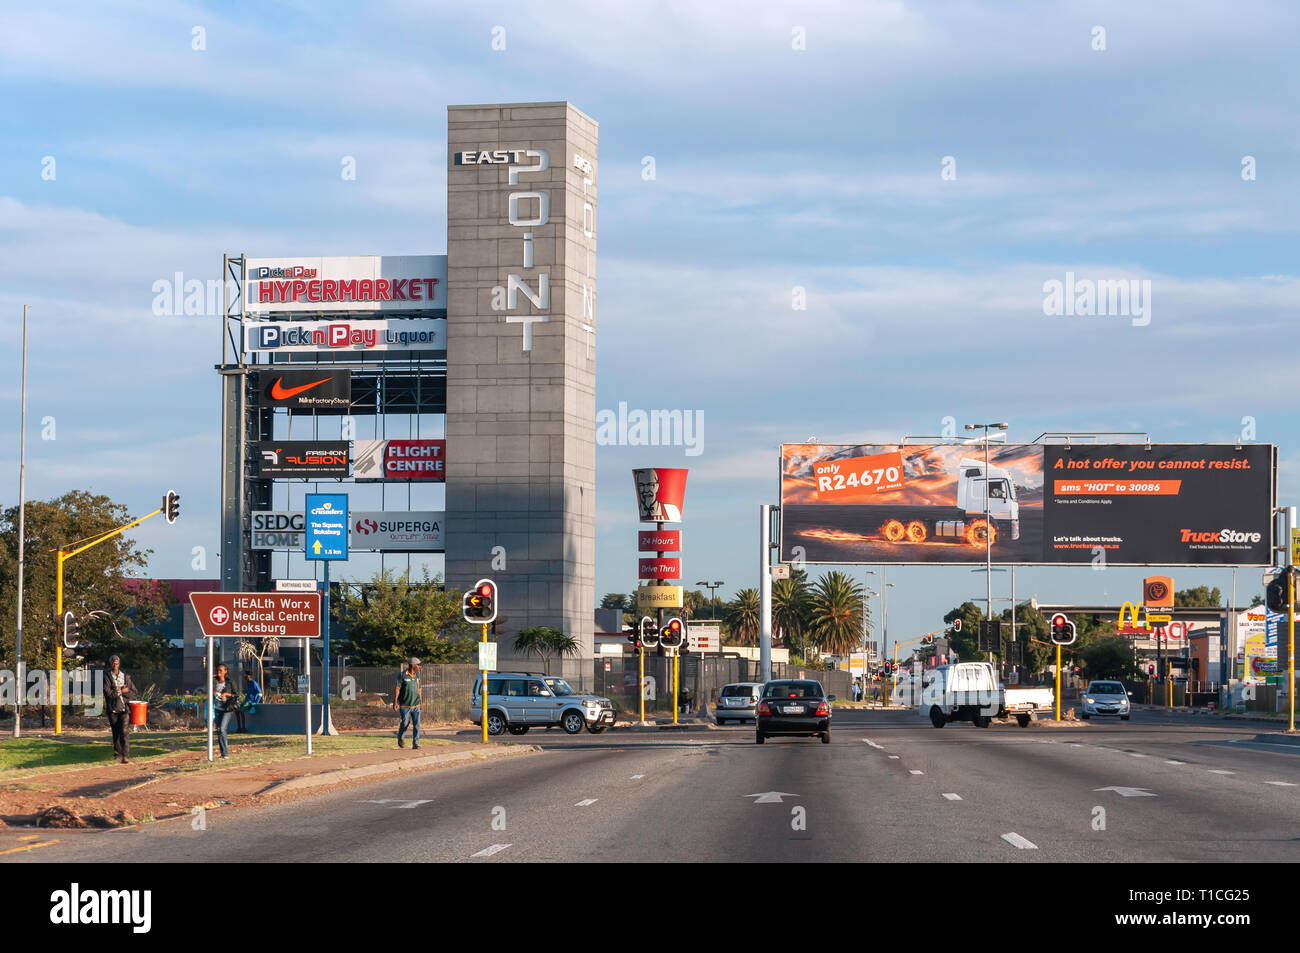 East Point Shopping Centre, North Rand Road, Boxberg, Gauteng Province, Republic of South Africa Stock Photo